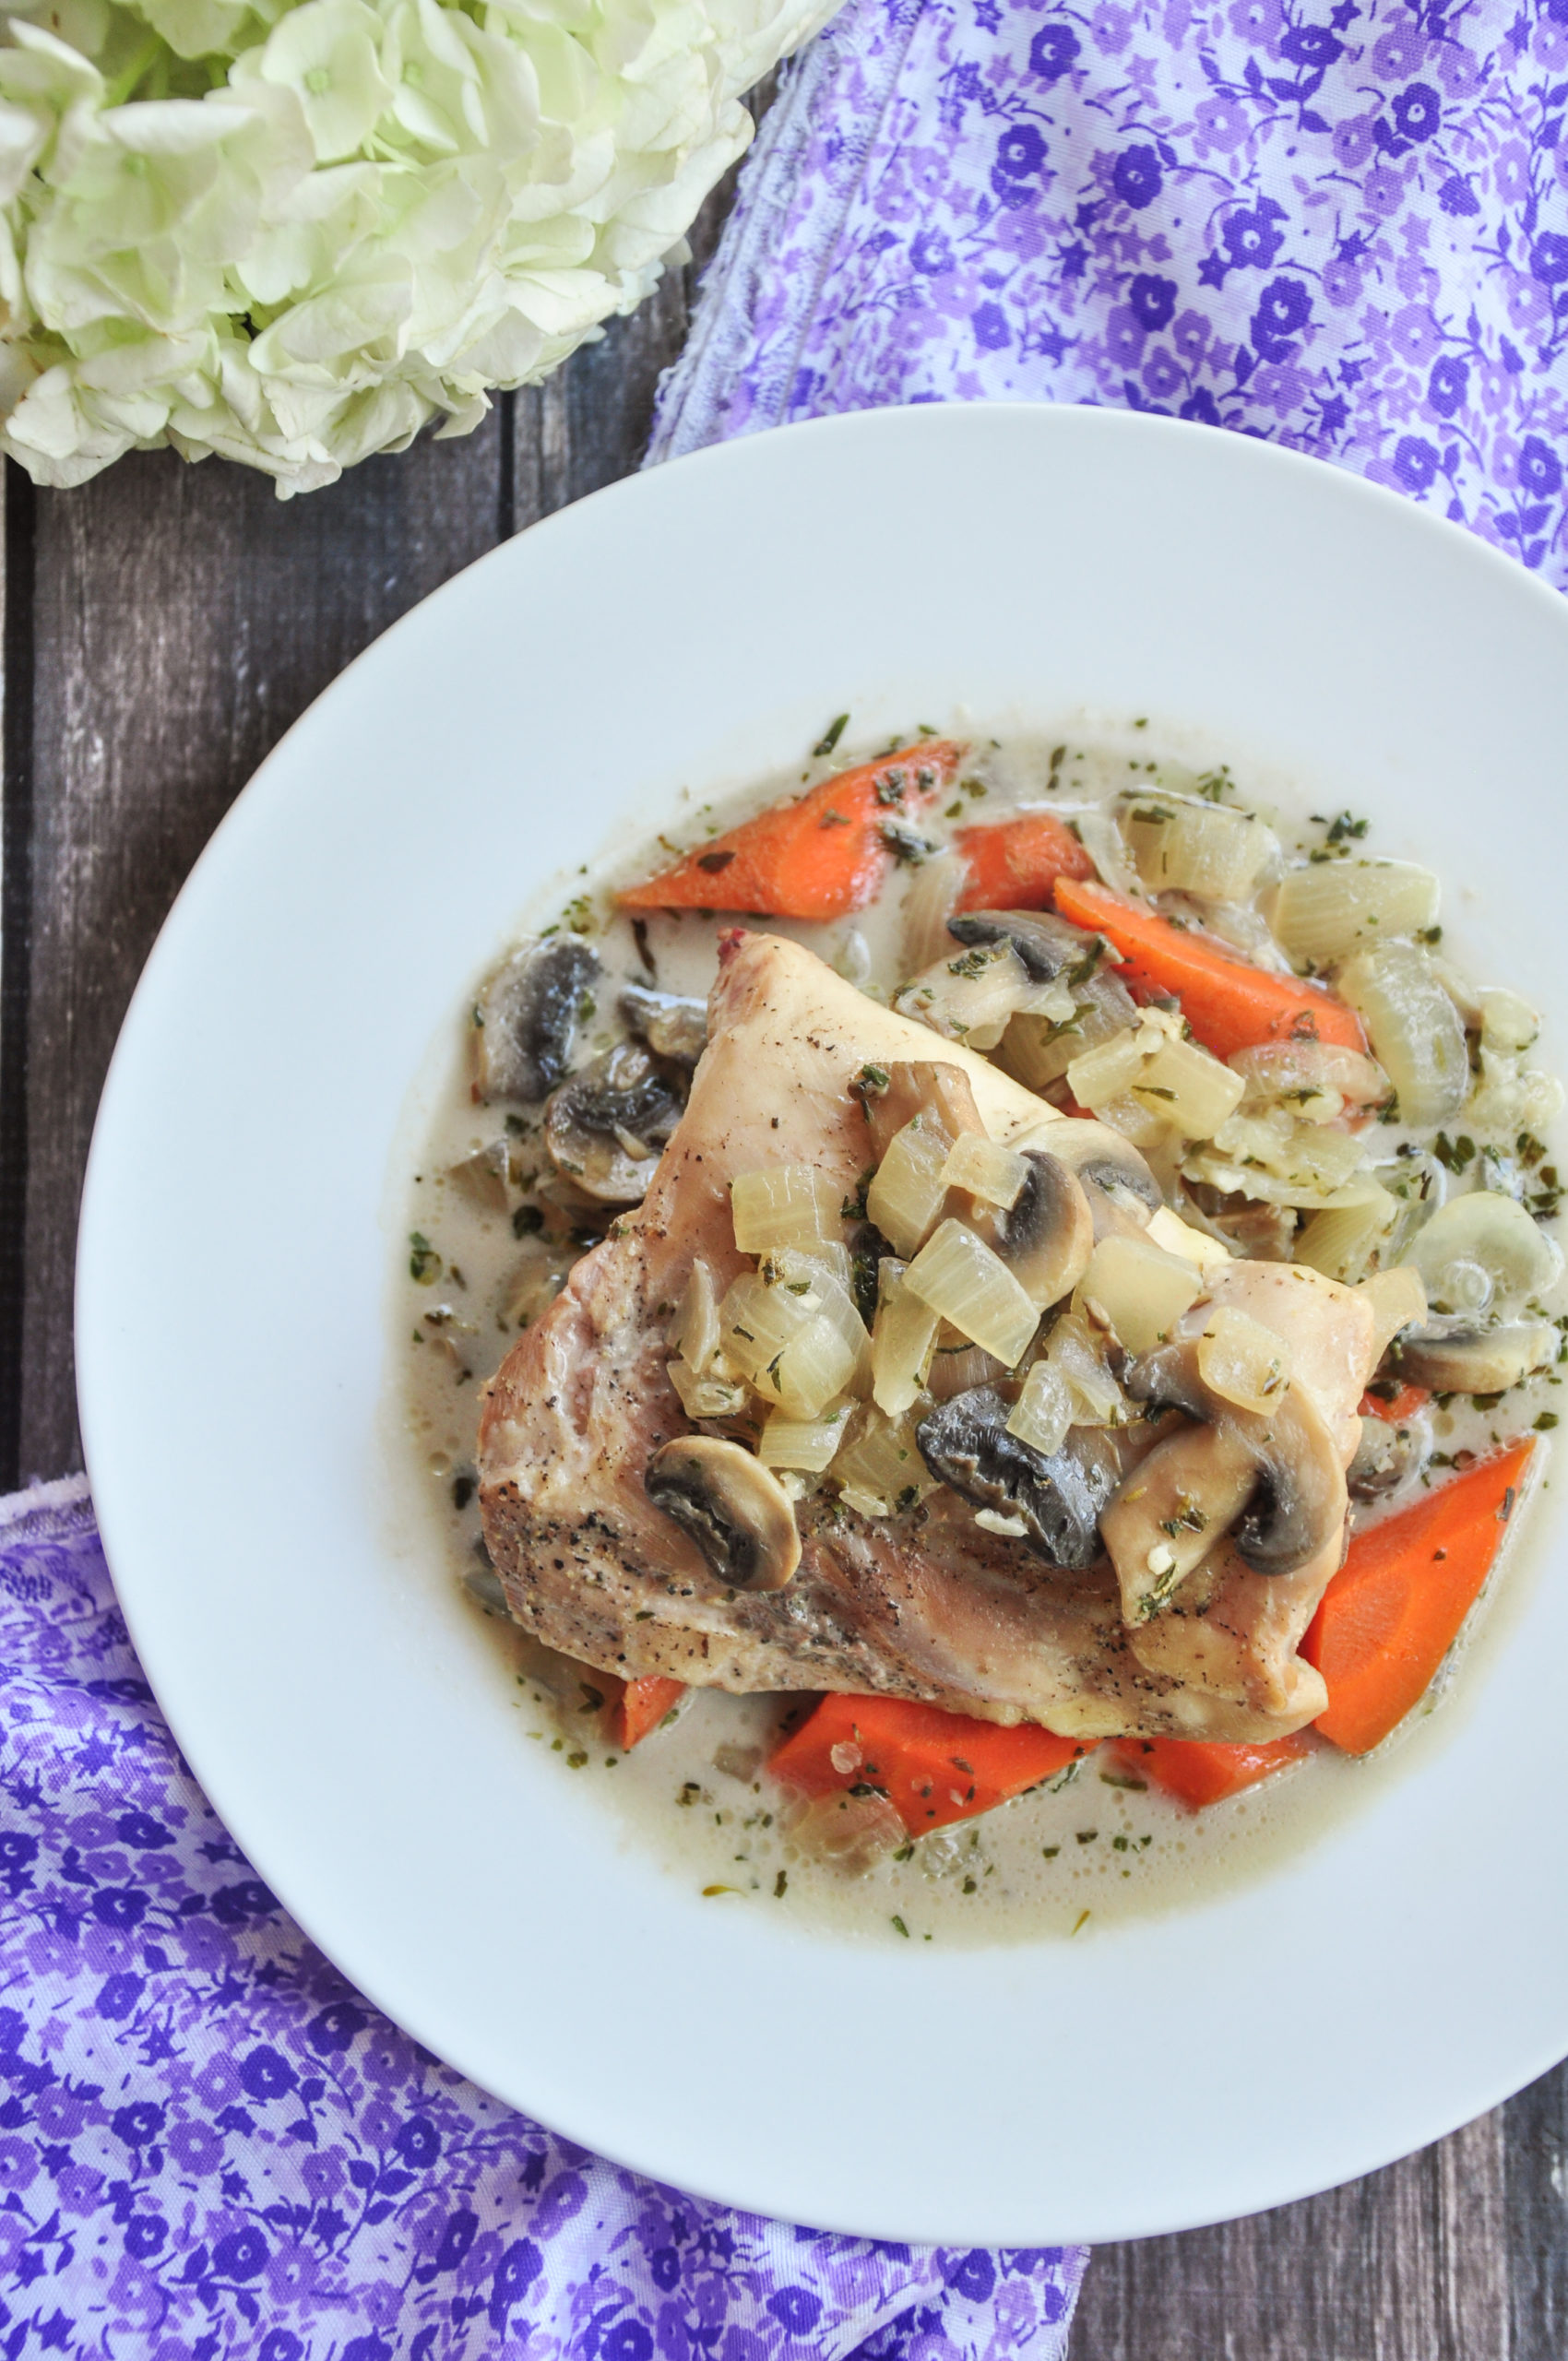 This slow cooker coq au vin blanc is flavorful, rich, and healthy. Just 6 easy steps, 14 simple ingredients, and 15 minutes of prep. Perfect for Sunday’s dinner.